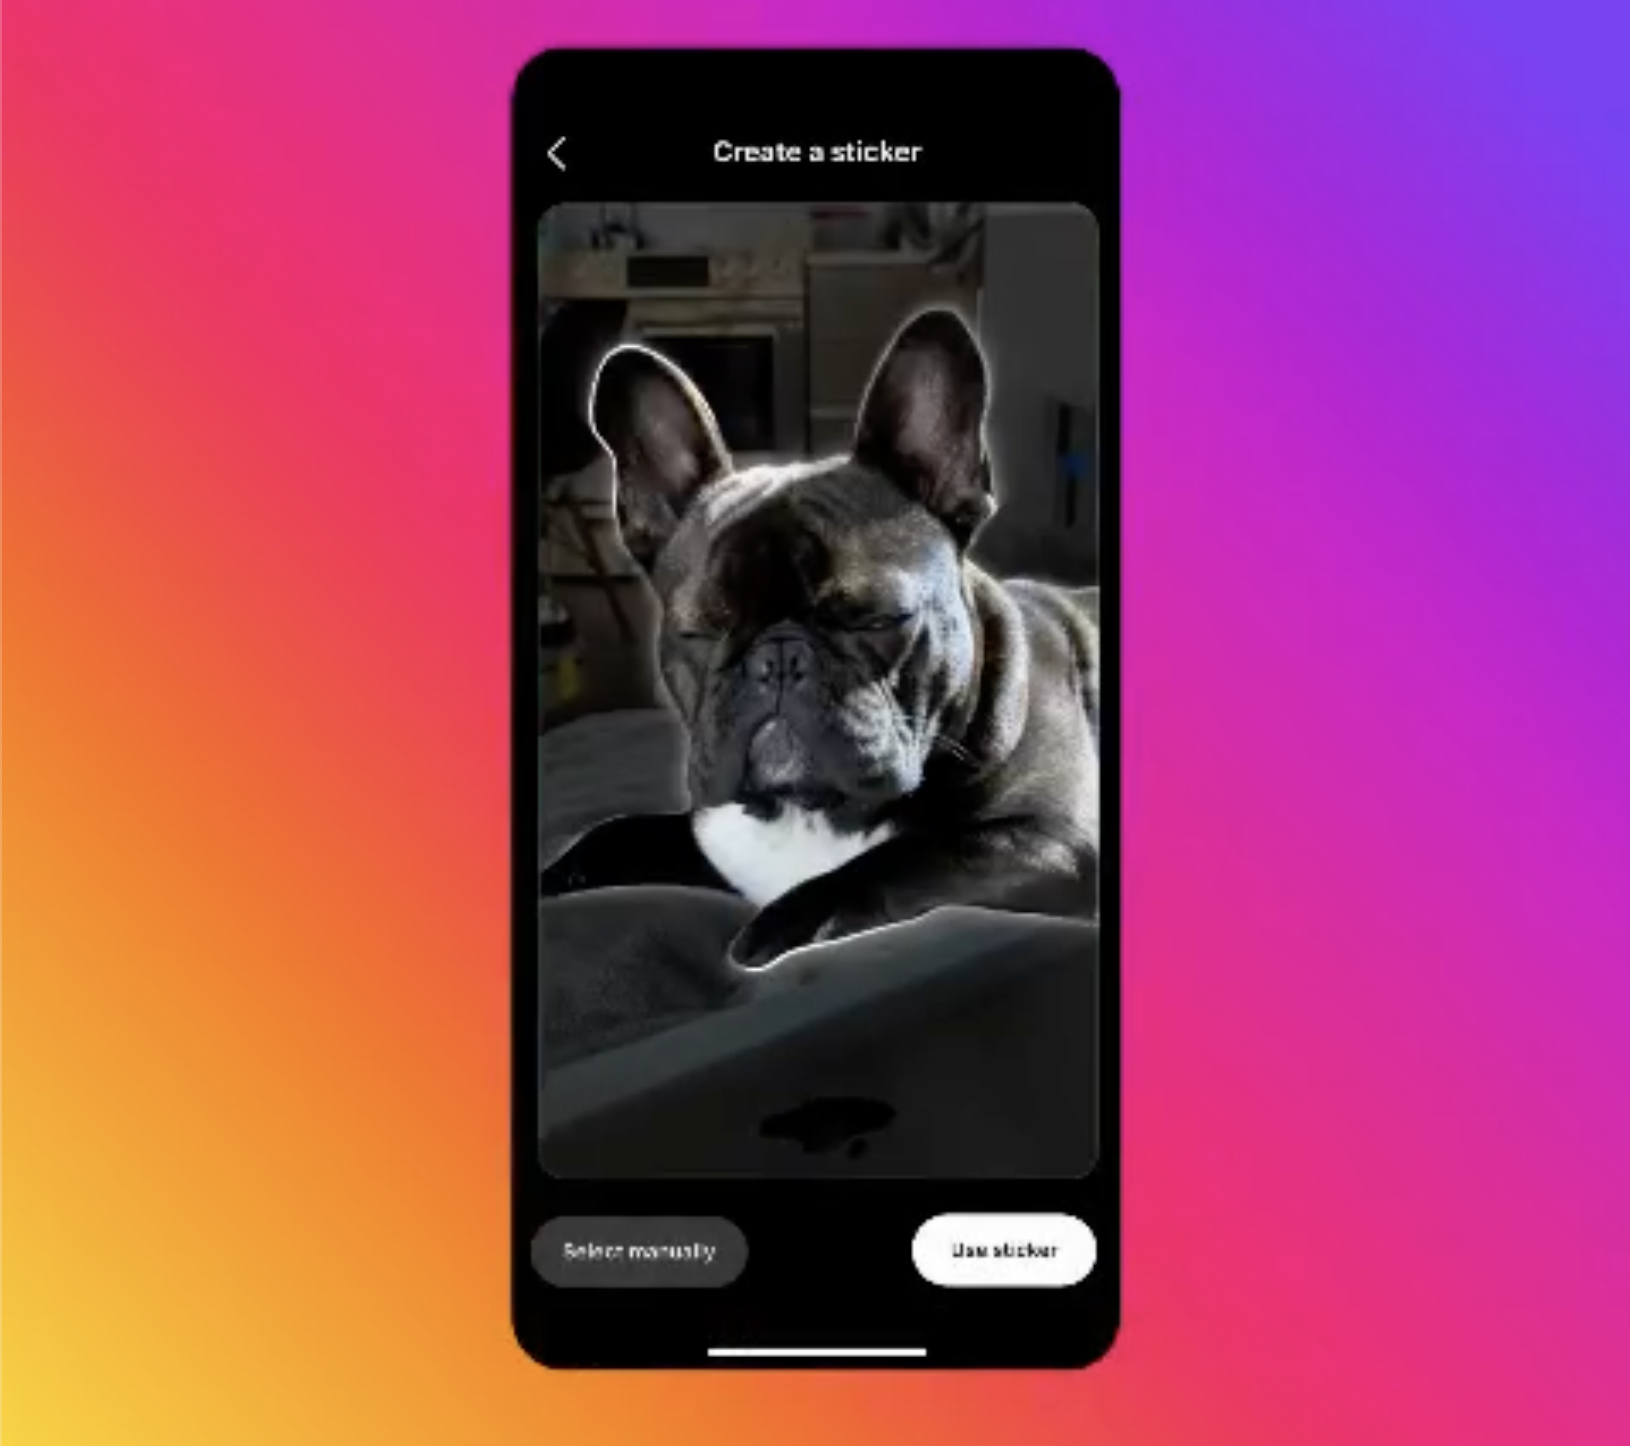 A demo of Instagram's sticker maker tool showing a French bulldog chosen as the sticker